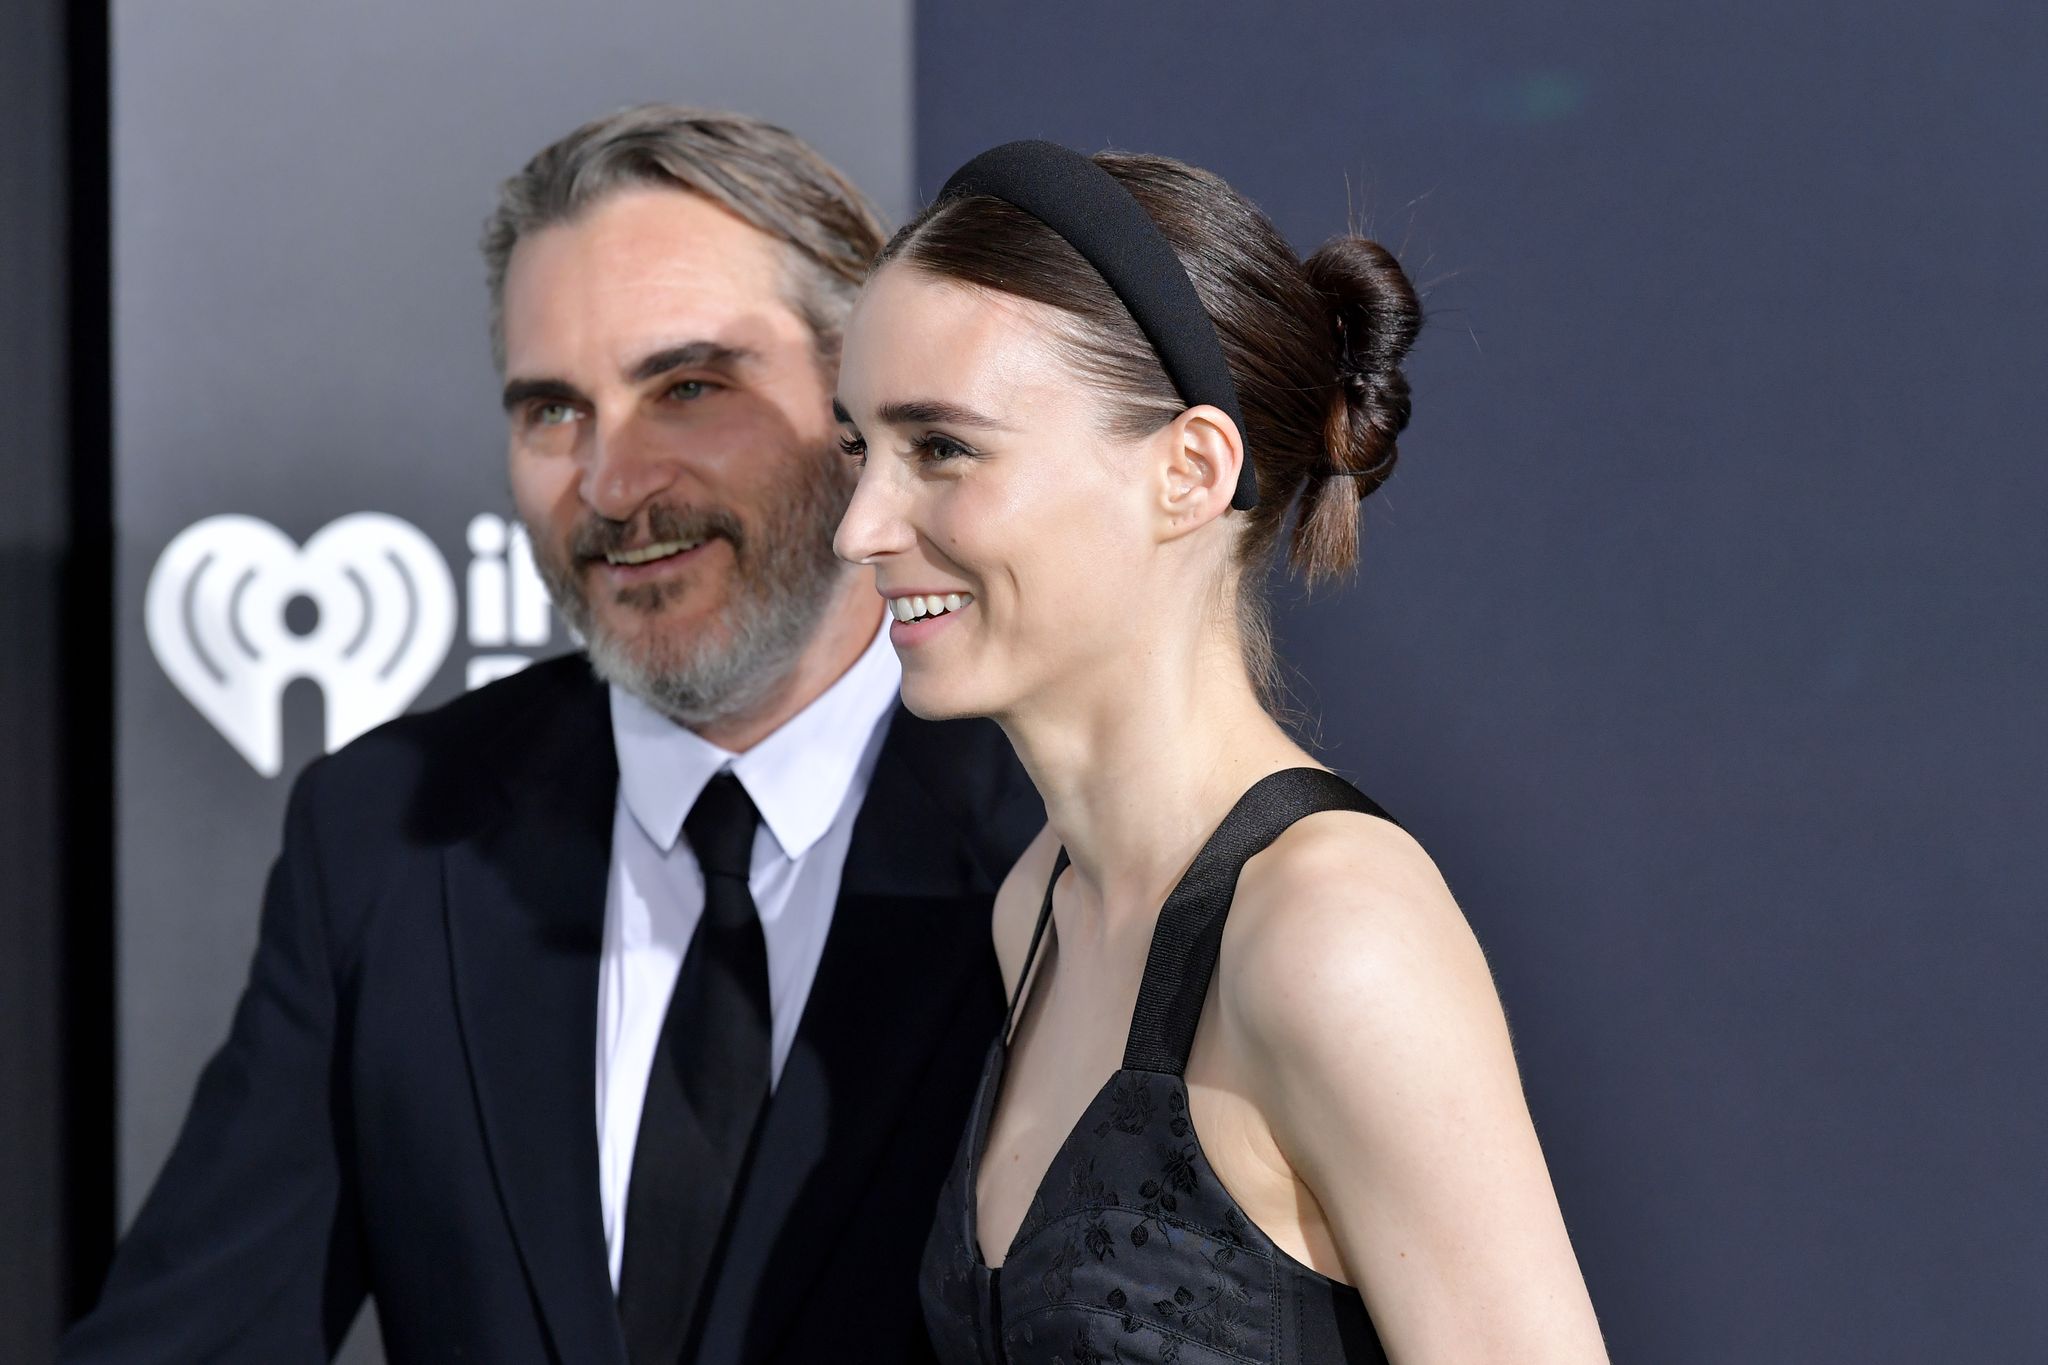 Joaquin Phoenix and Rooney Mara attend the premiere of "Joker" in September2019 in Hollywood, California | Source: Getty Images